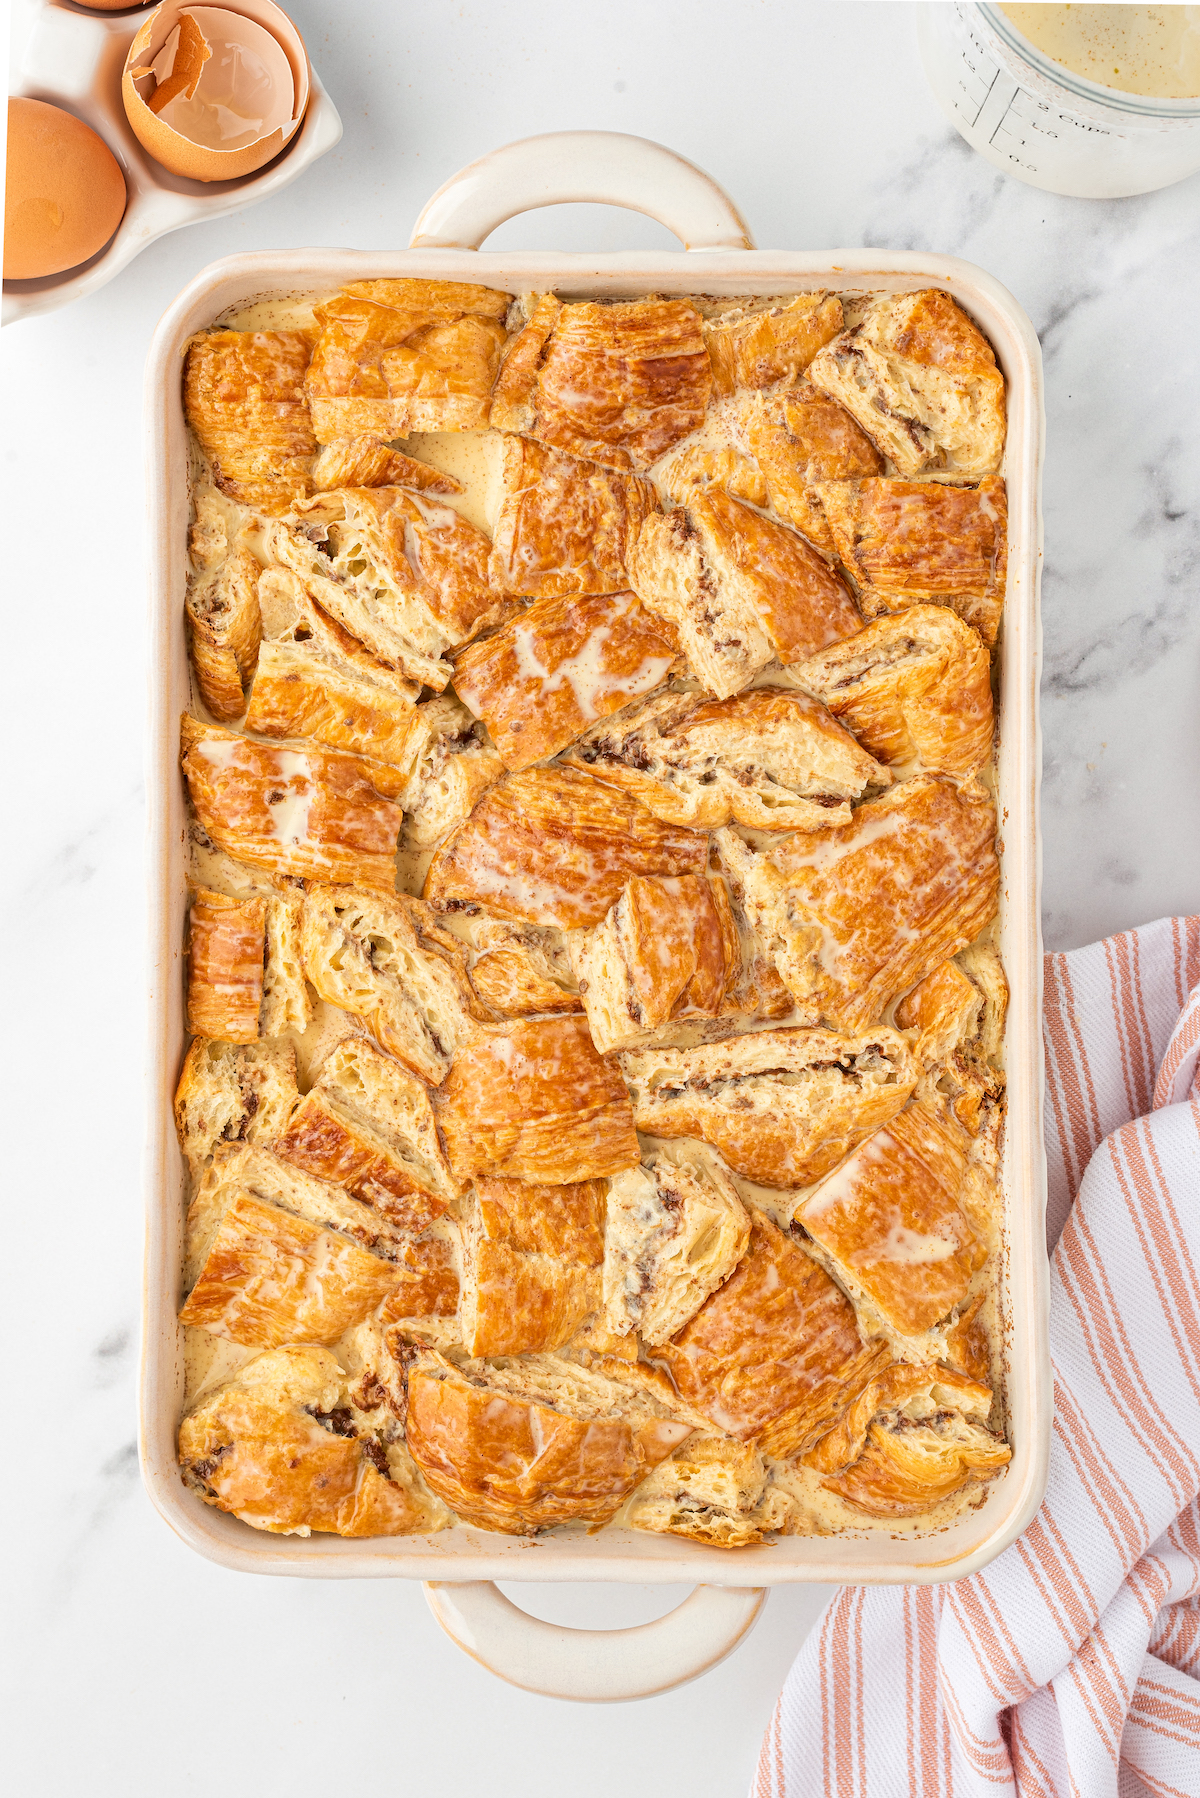 Unbaked Nutella croissant bread pudding.